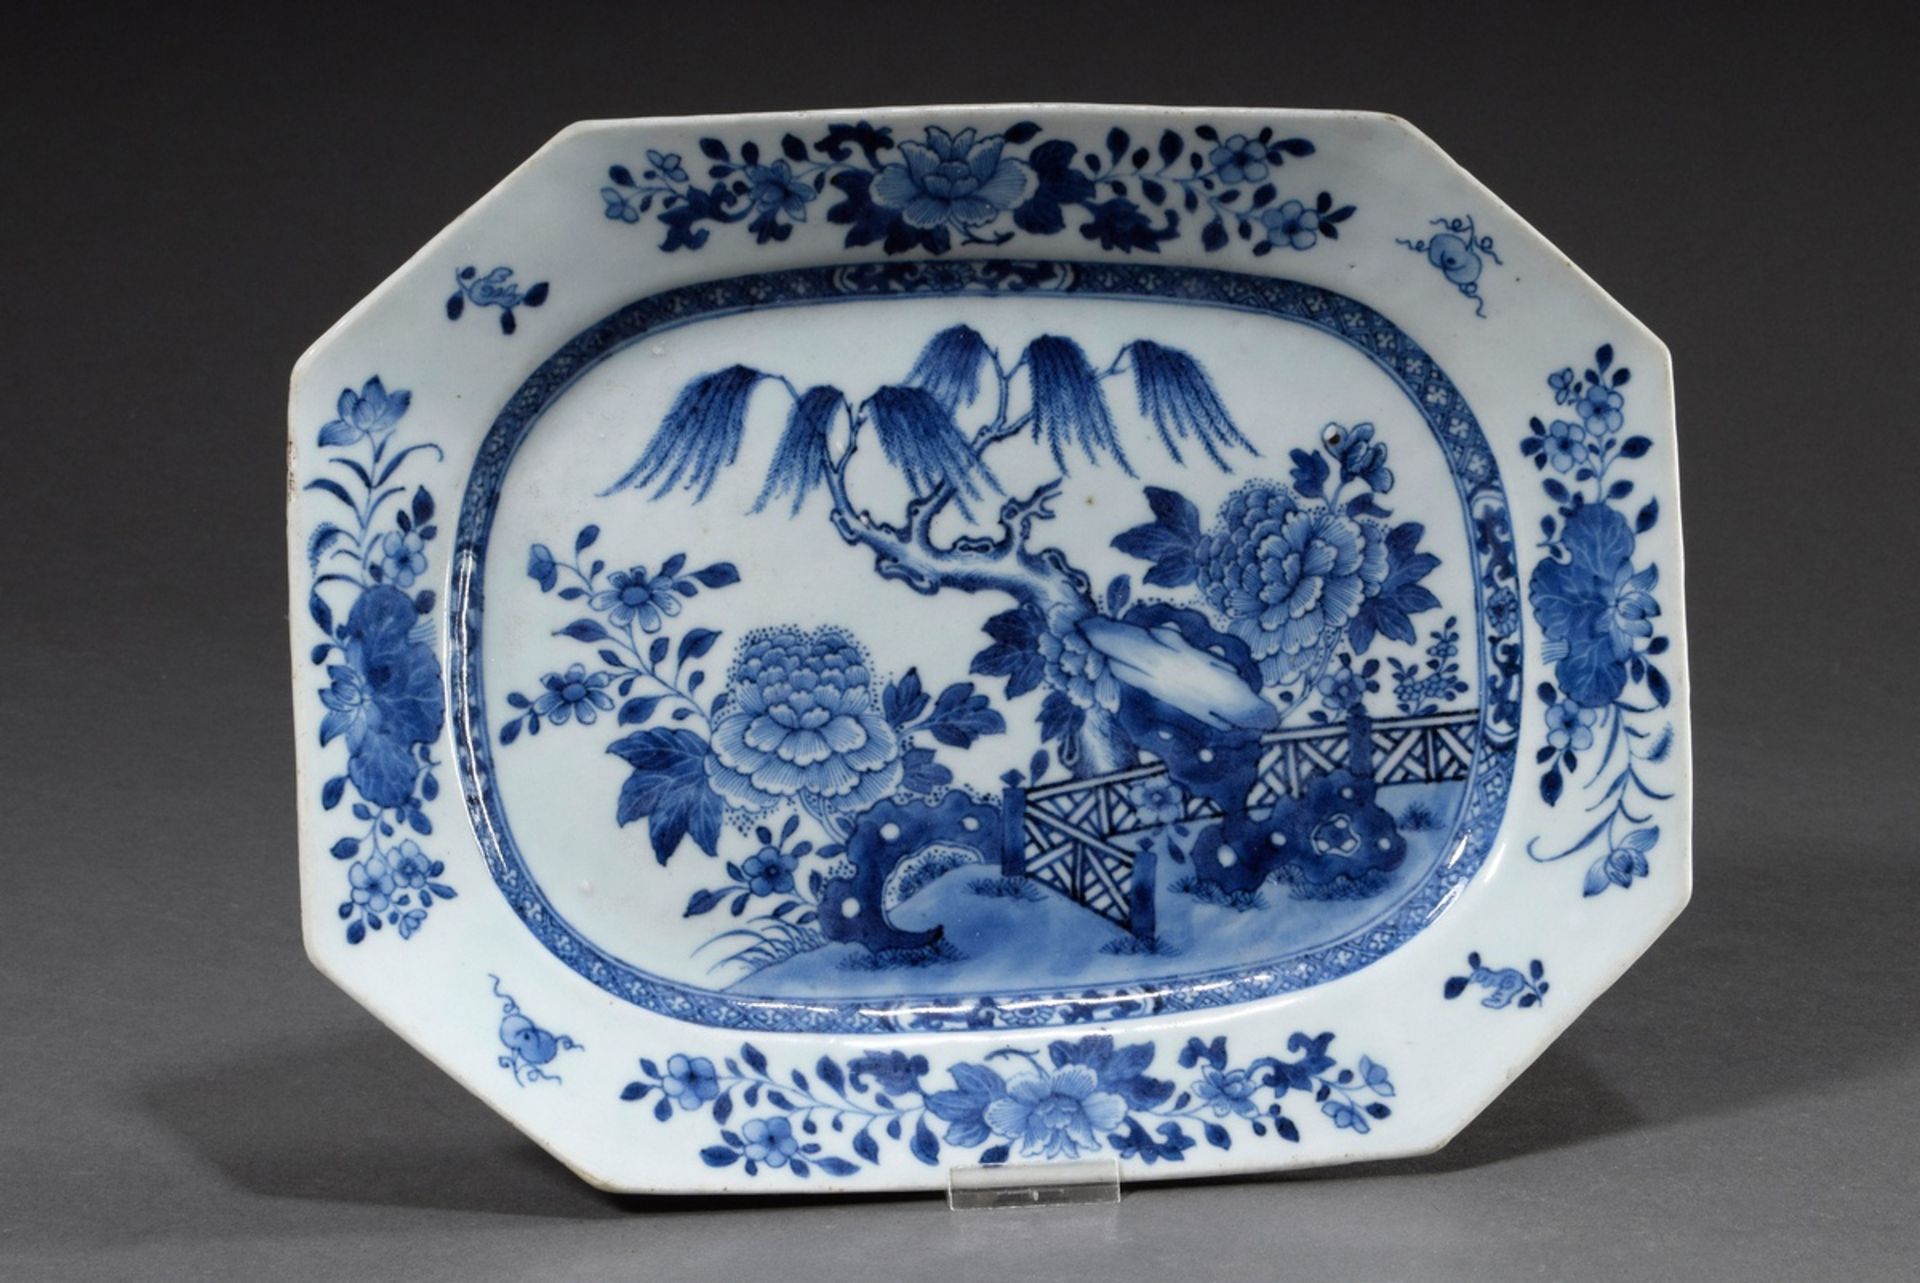 Octagonal plate with blue painting decoration "Garden", Qianlong period, China mid 18th century, 3, - Image 2 of 4